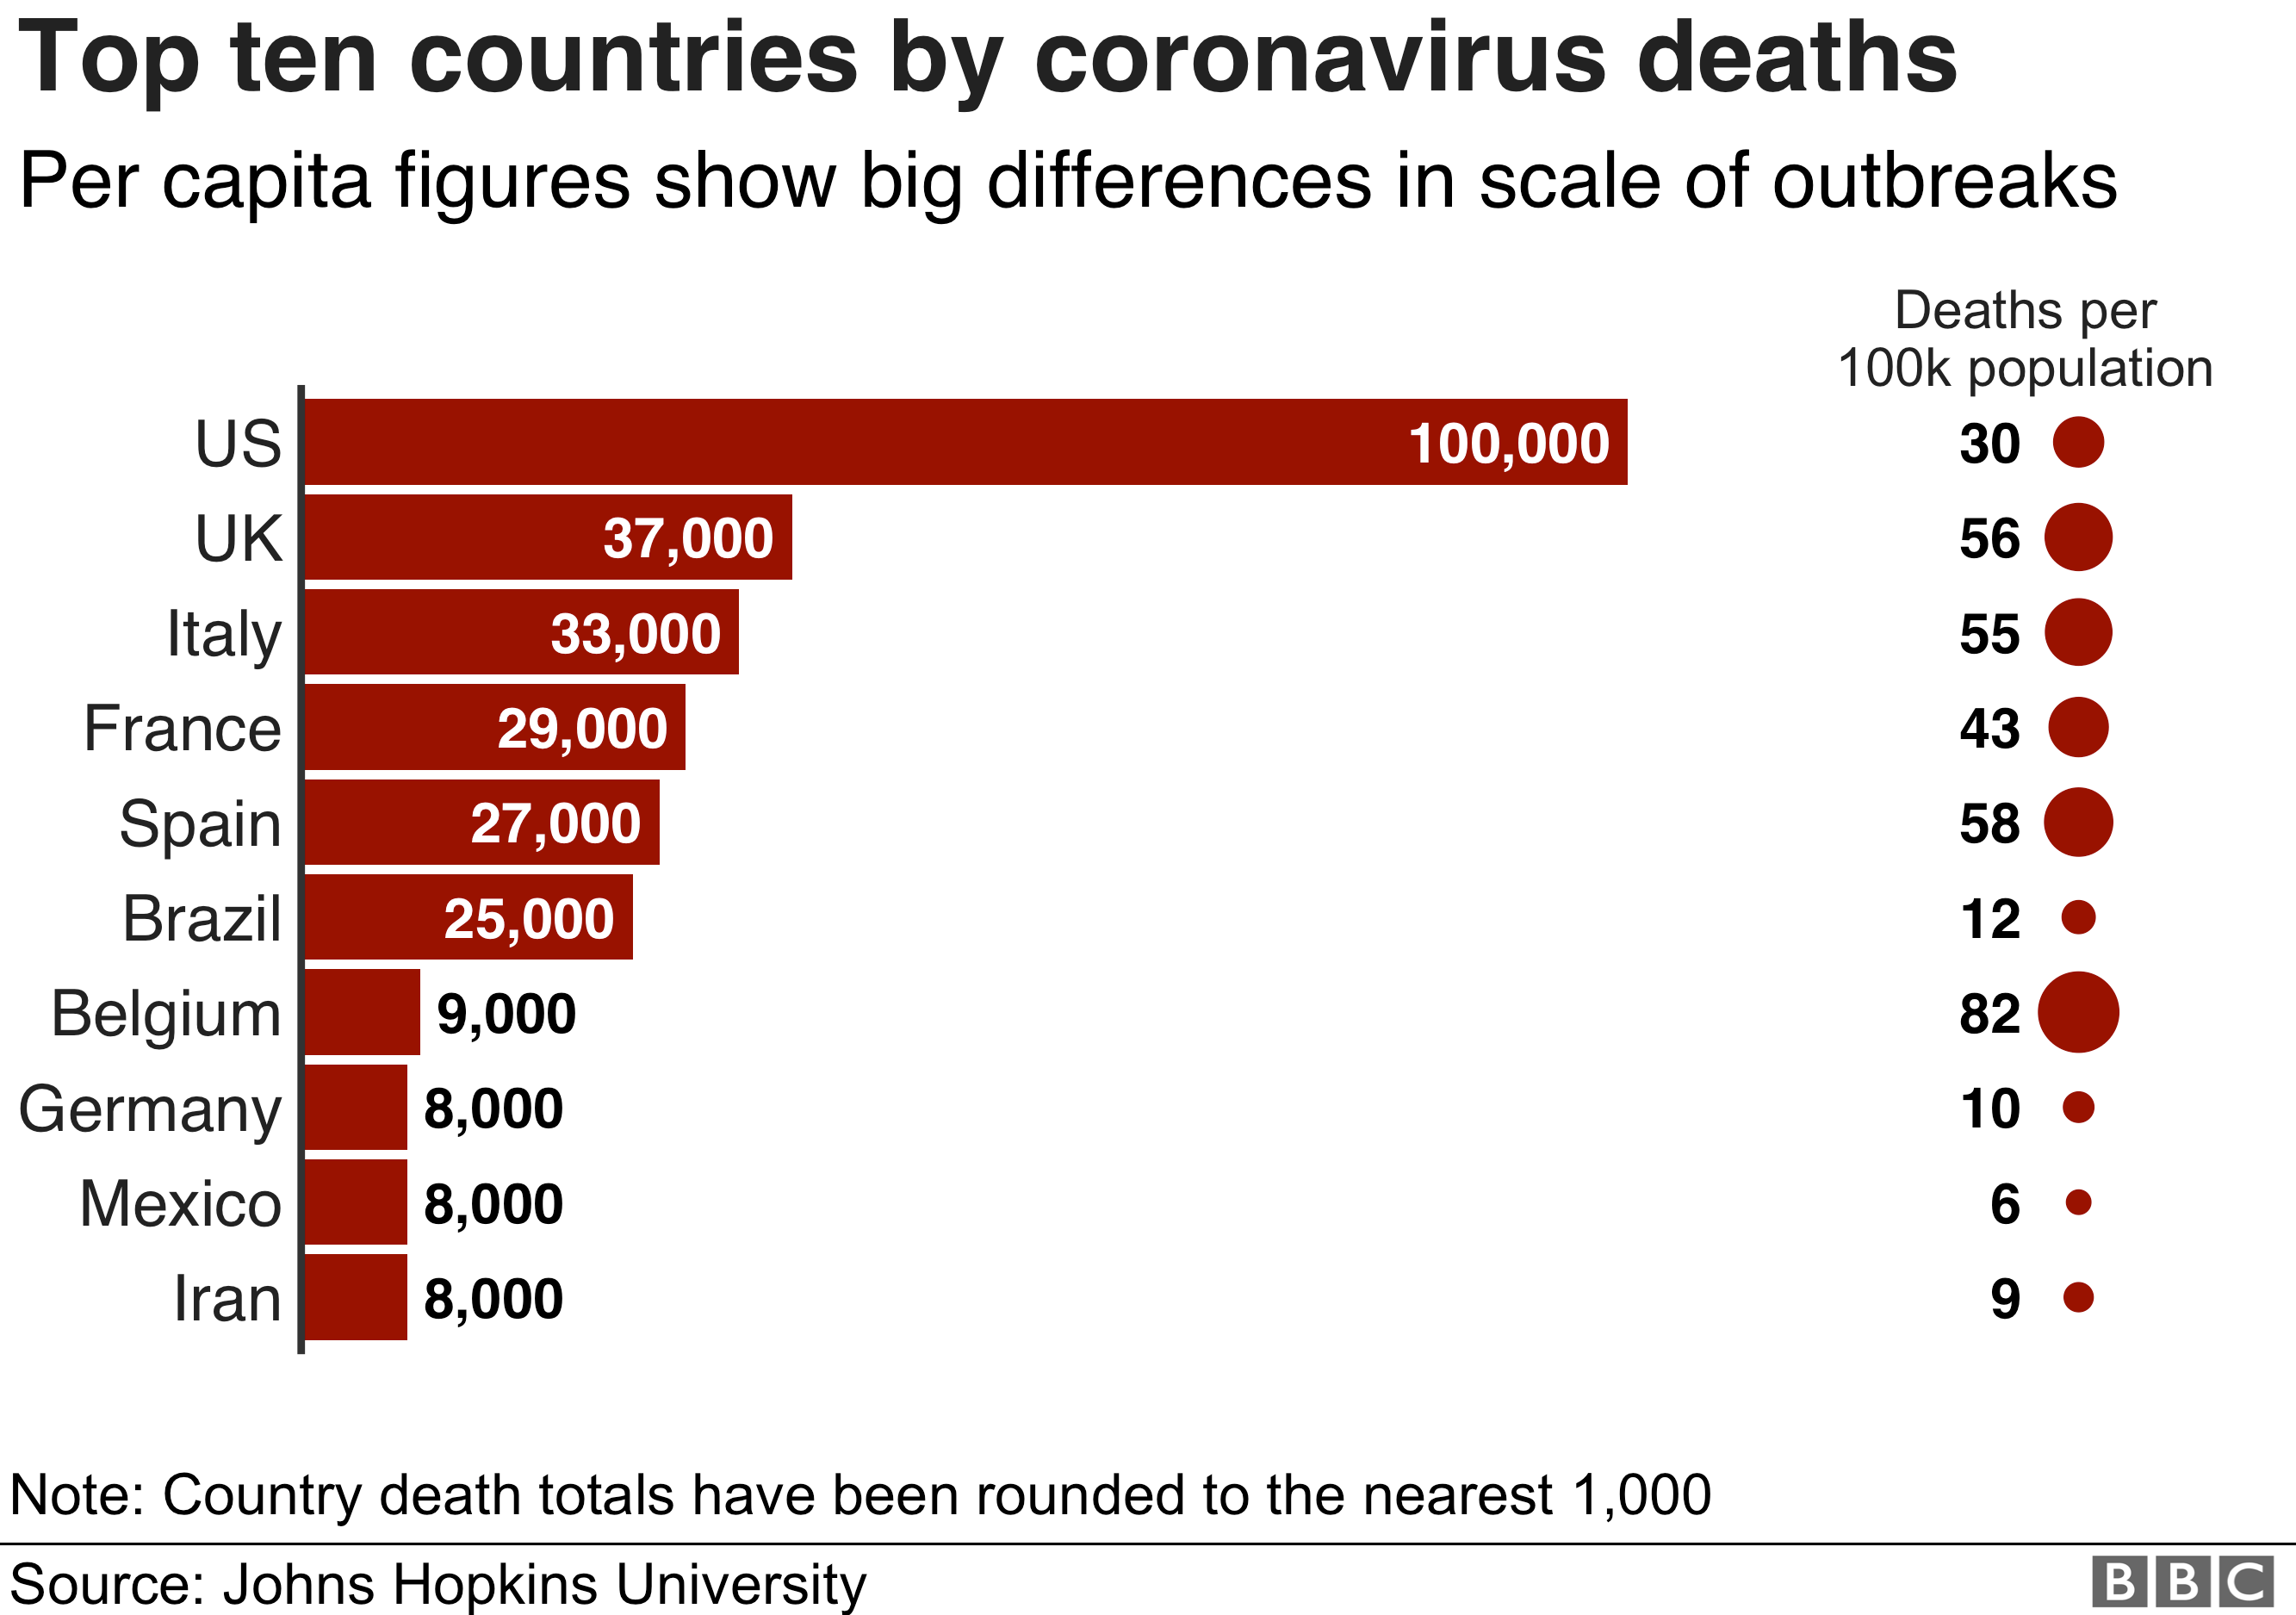 Chart showing the ten countries with the highest death tolls and the mortality rates for each. The US has seen 100,000 deaths, a rate of 30 people per 100,000 population. Belgium has seen 9,000 deaths, a rate of 82 people per 100,000 population. The UK has seen 37,000 deaths, a rate of 56 people per 100,000 population.